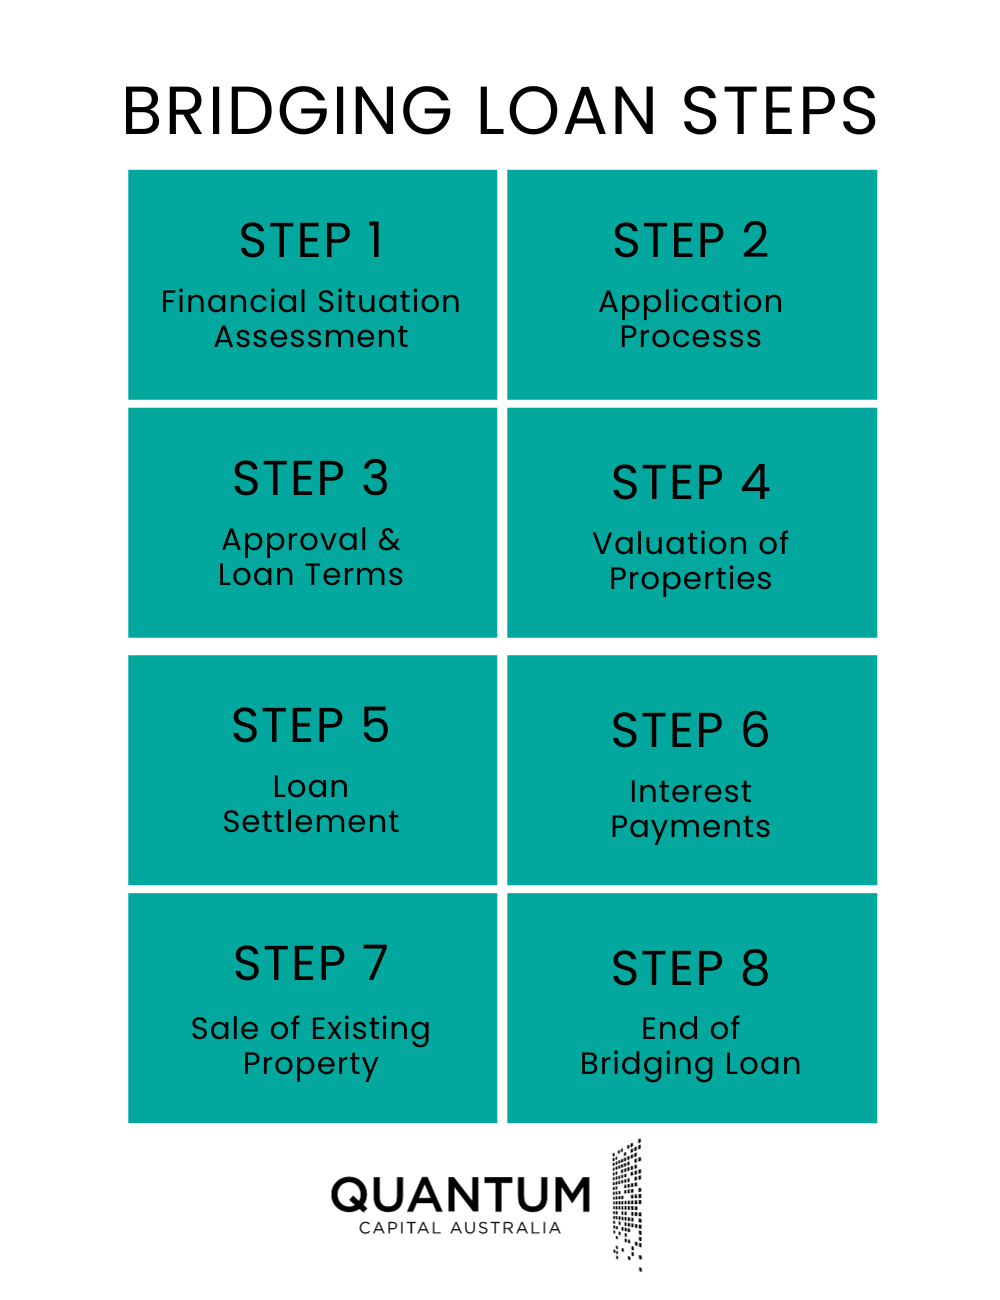 Infographic showing how bridging loans work in eight steps including financial assessment, application, approval and loan terms, valuation, settlement, interest payments, sale of existing property, and end of bridging loan.